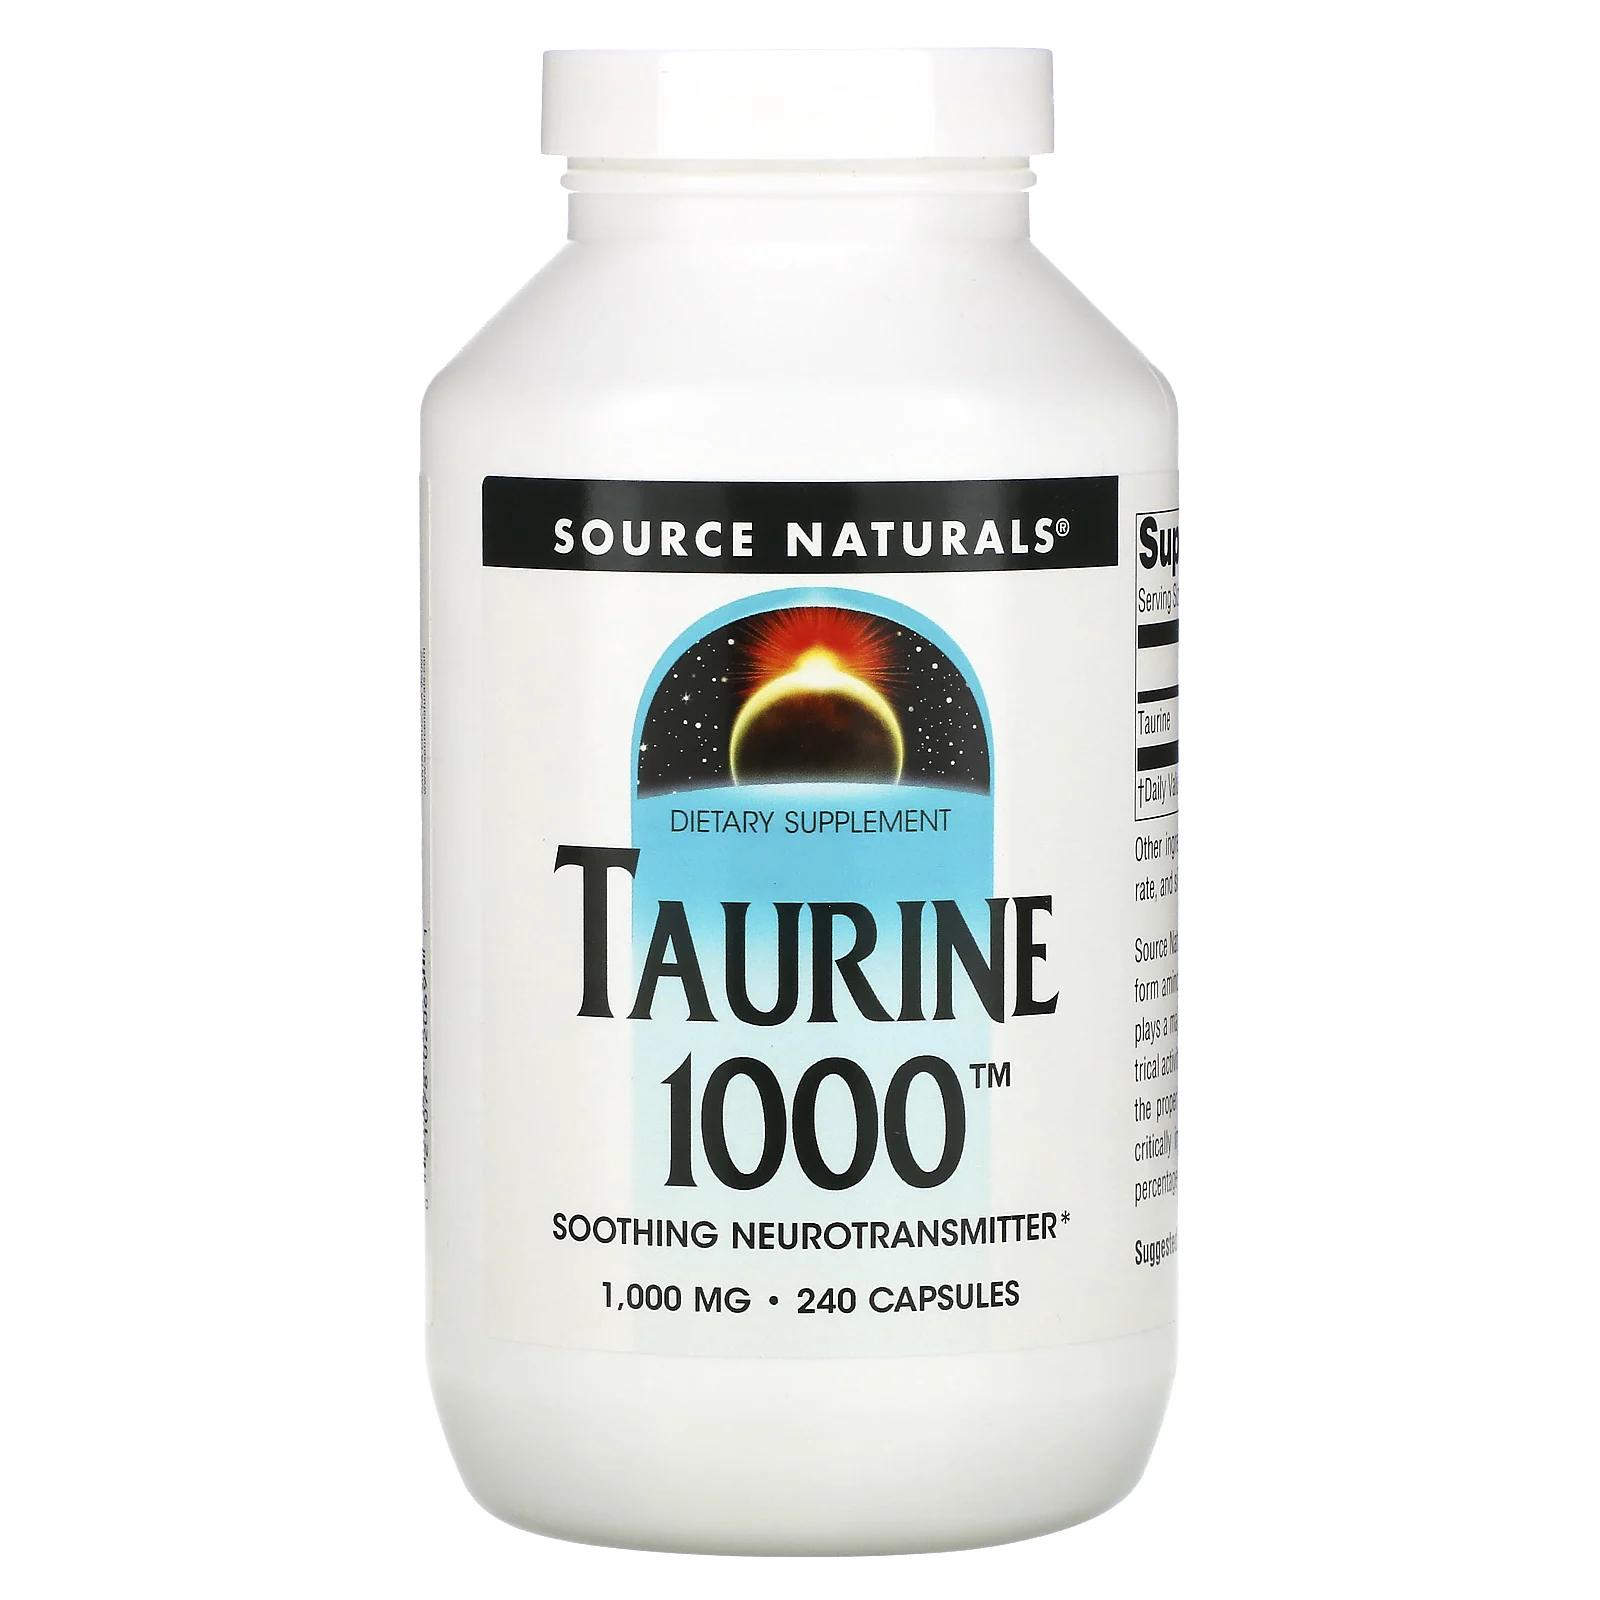 Source Naturals Таурин 1000 1000 мг 240 капсул source naturals перилловое масло 1000 мг 90 гелевых капсул